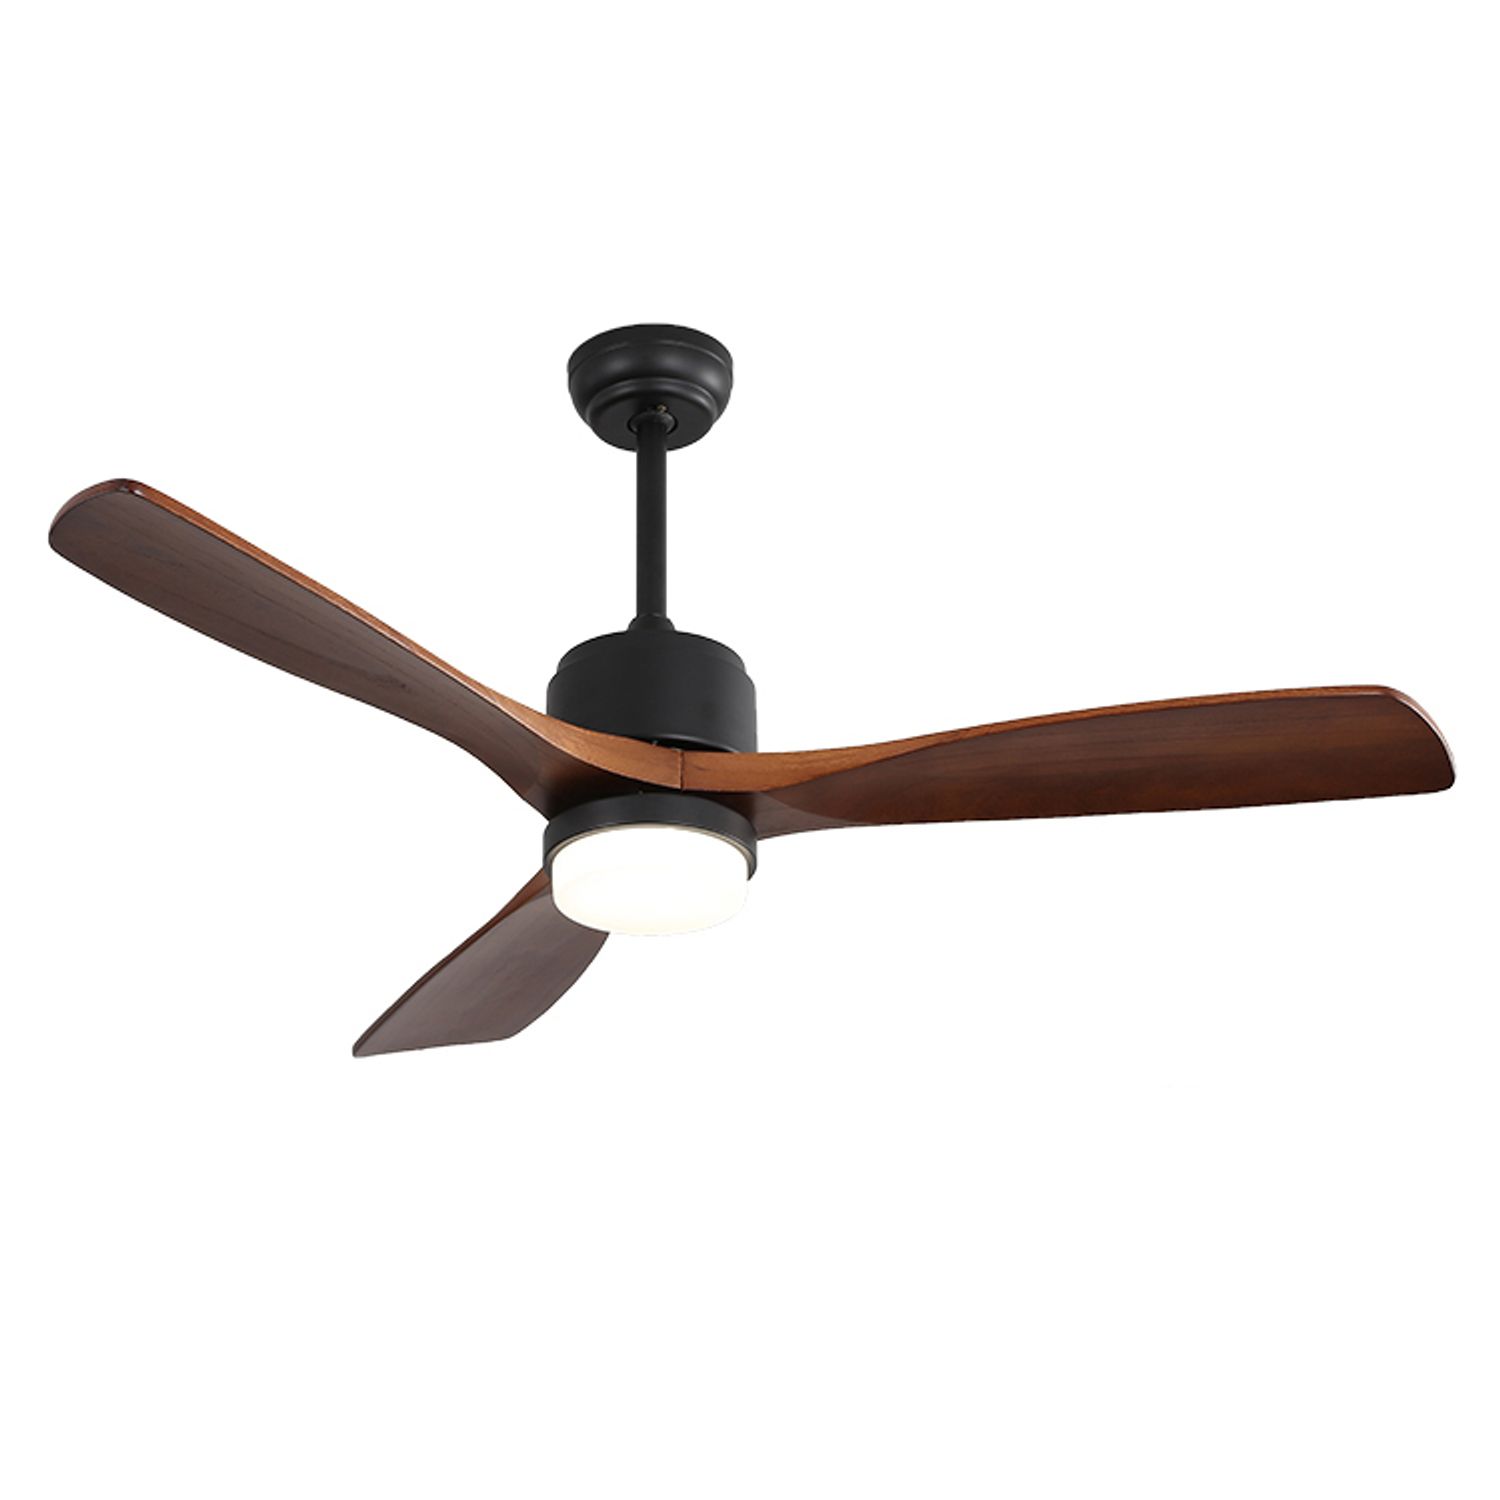 KBS 52 inch quiet ceiling fans with lights and remote control